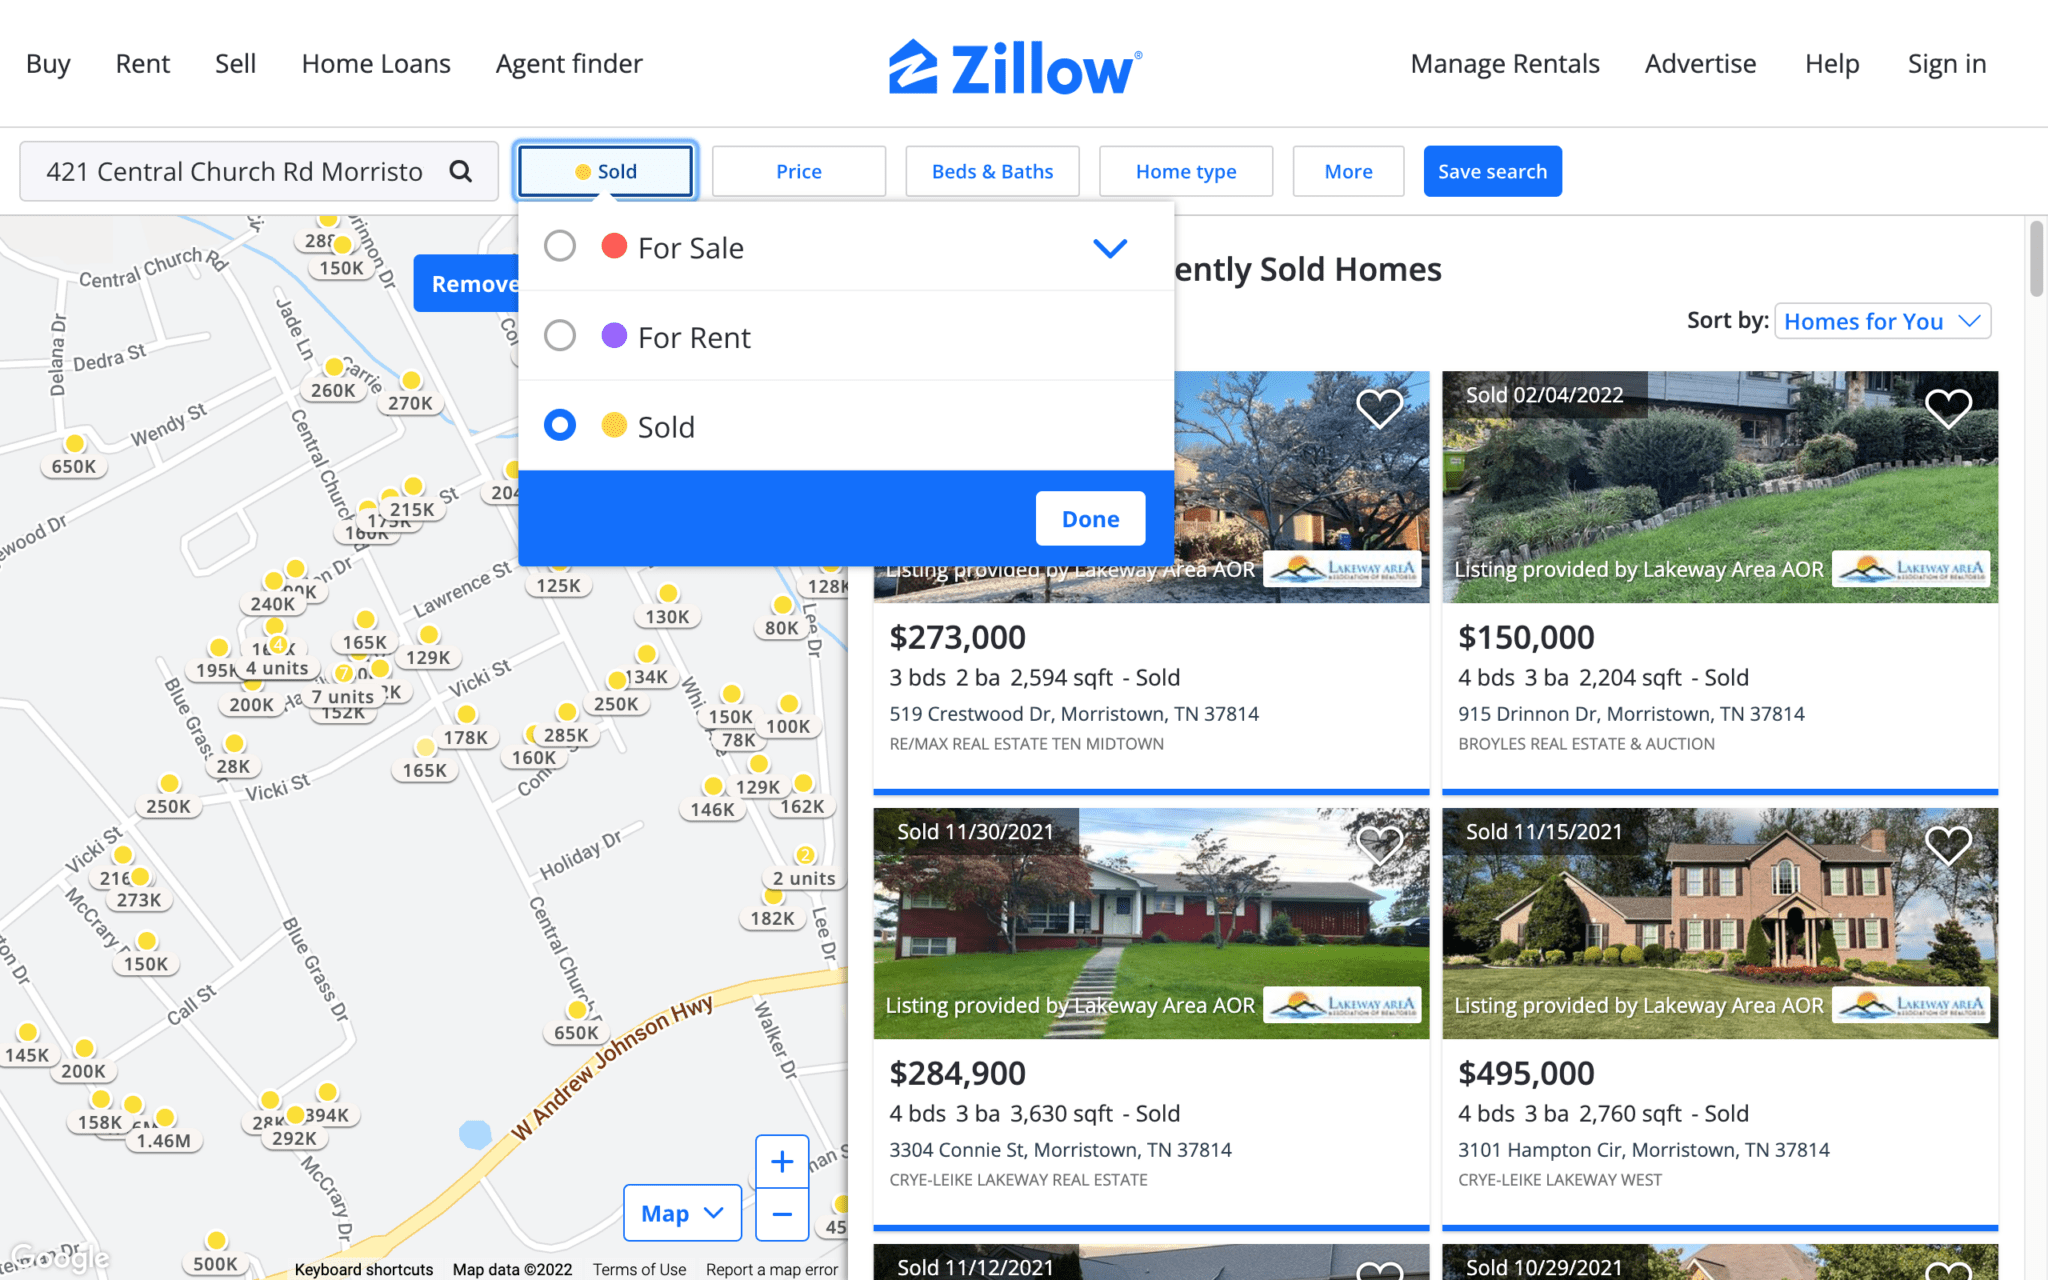 A screenshot of Zillow's website, showing how to use the filters options.